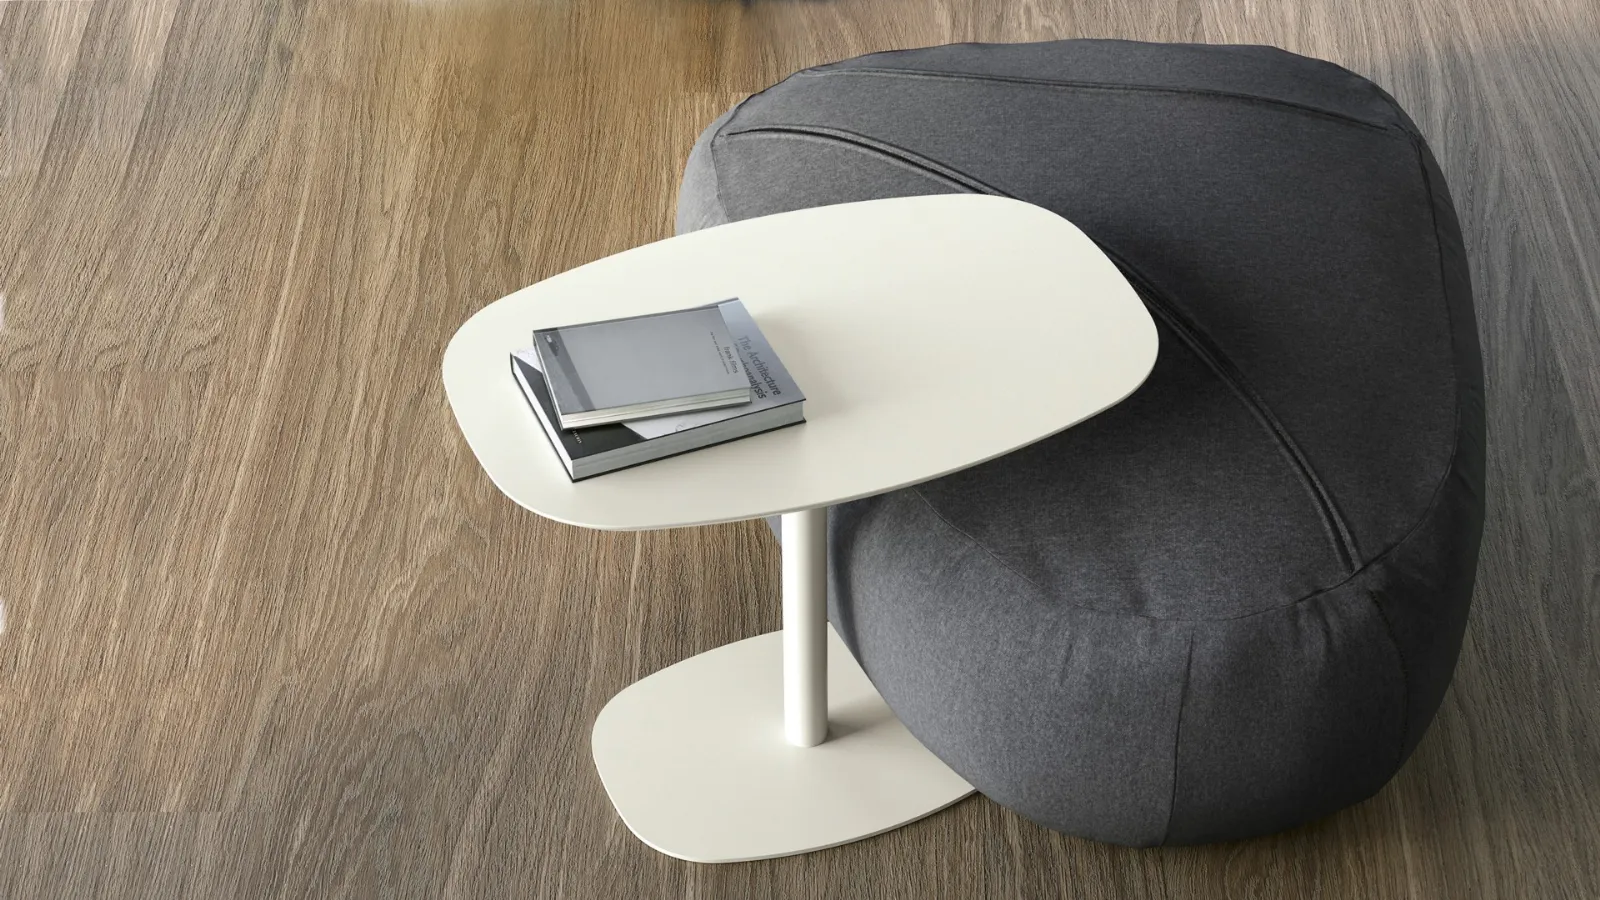 Sassi. Three soft poufs shapes shaped with